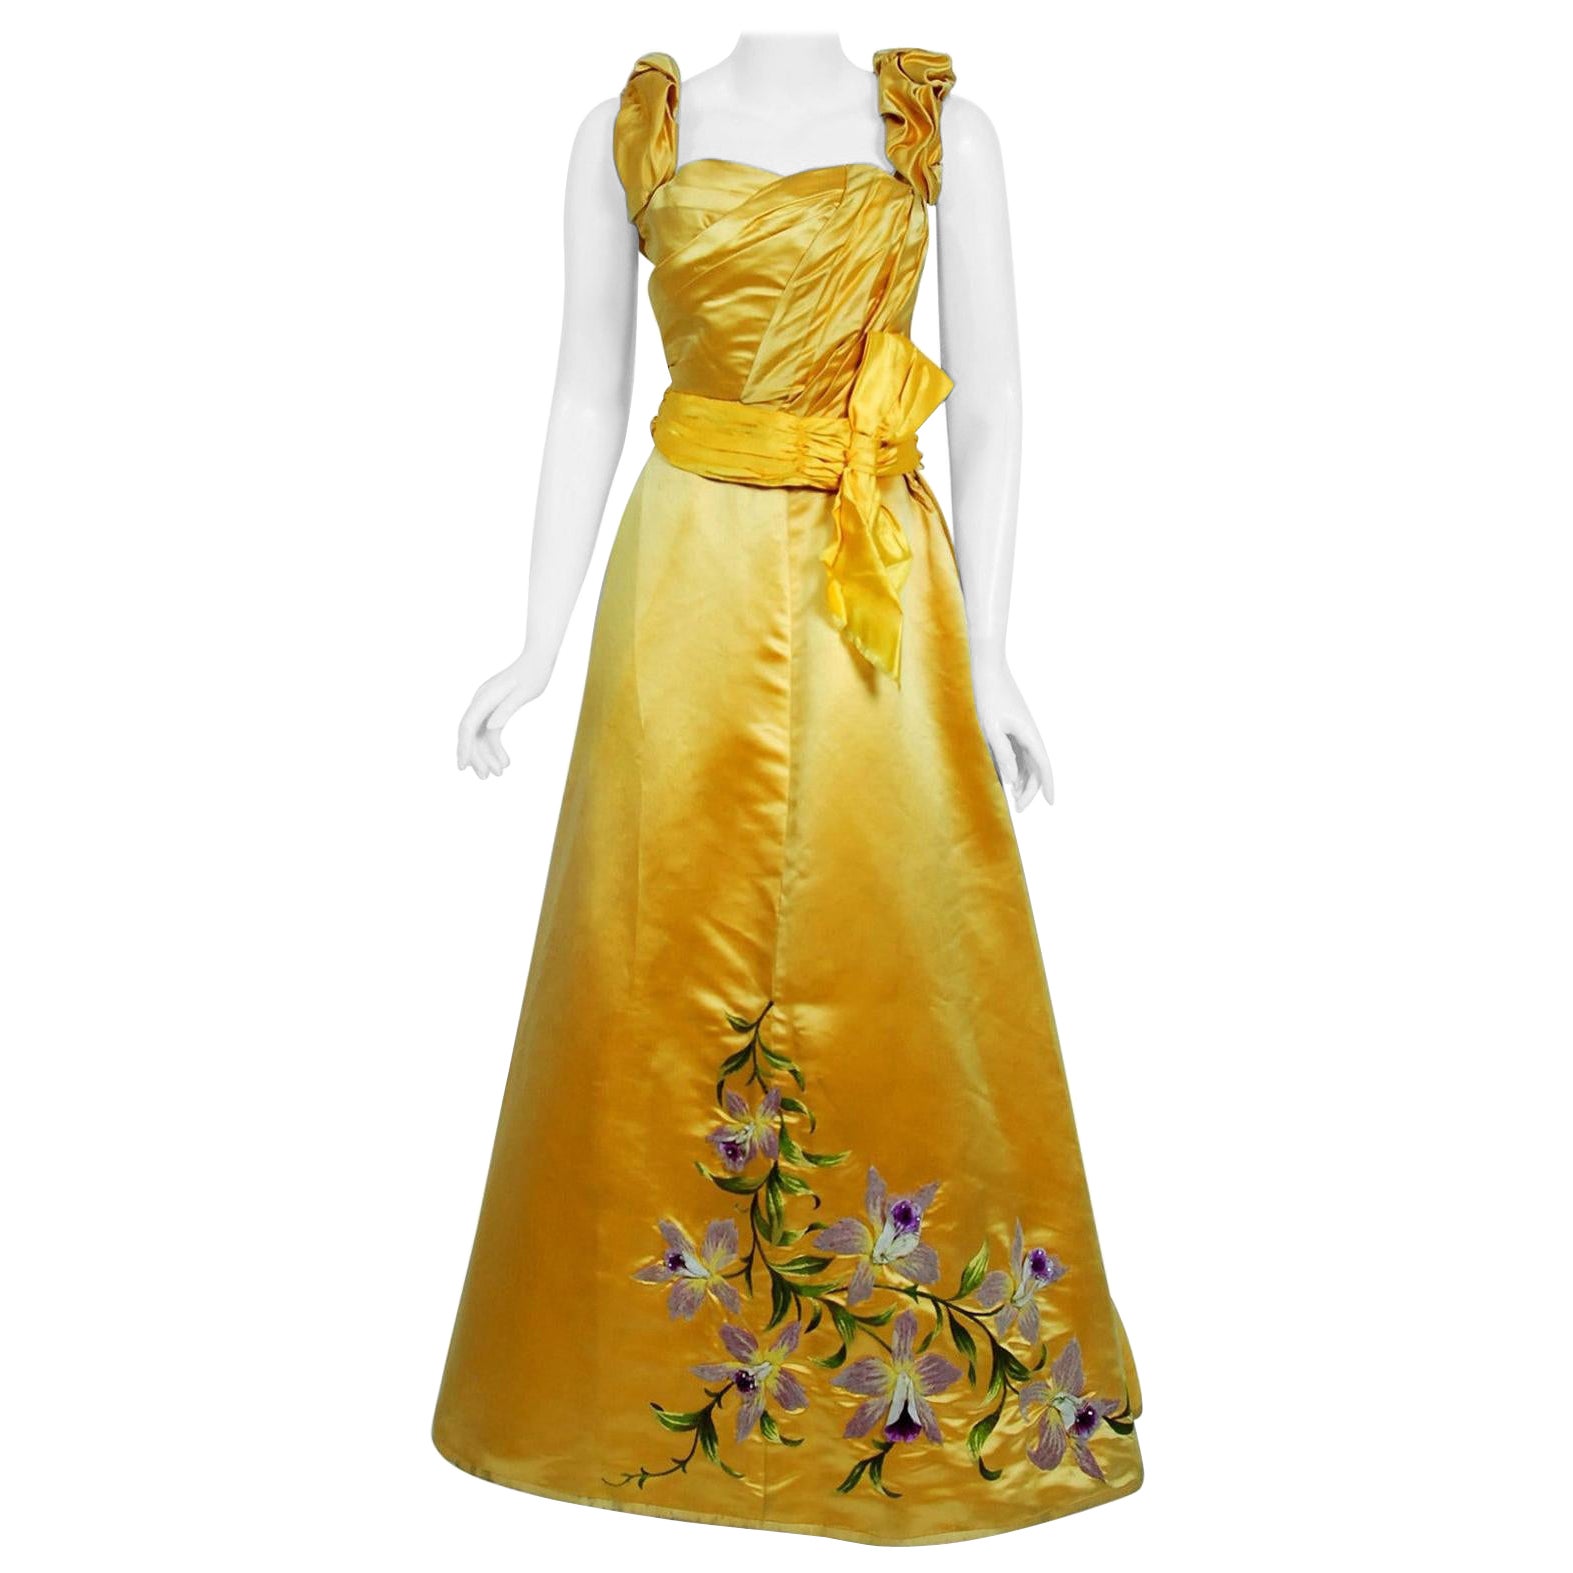 Antique 1890's Victorian French Couture Floral Embroidered Yellow Satin Gown For Sale